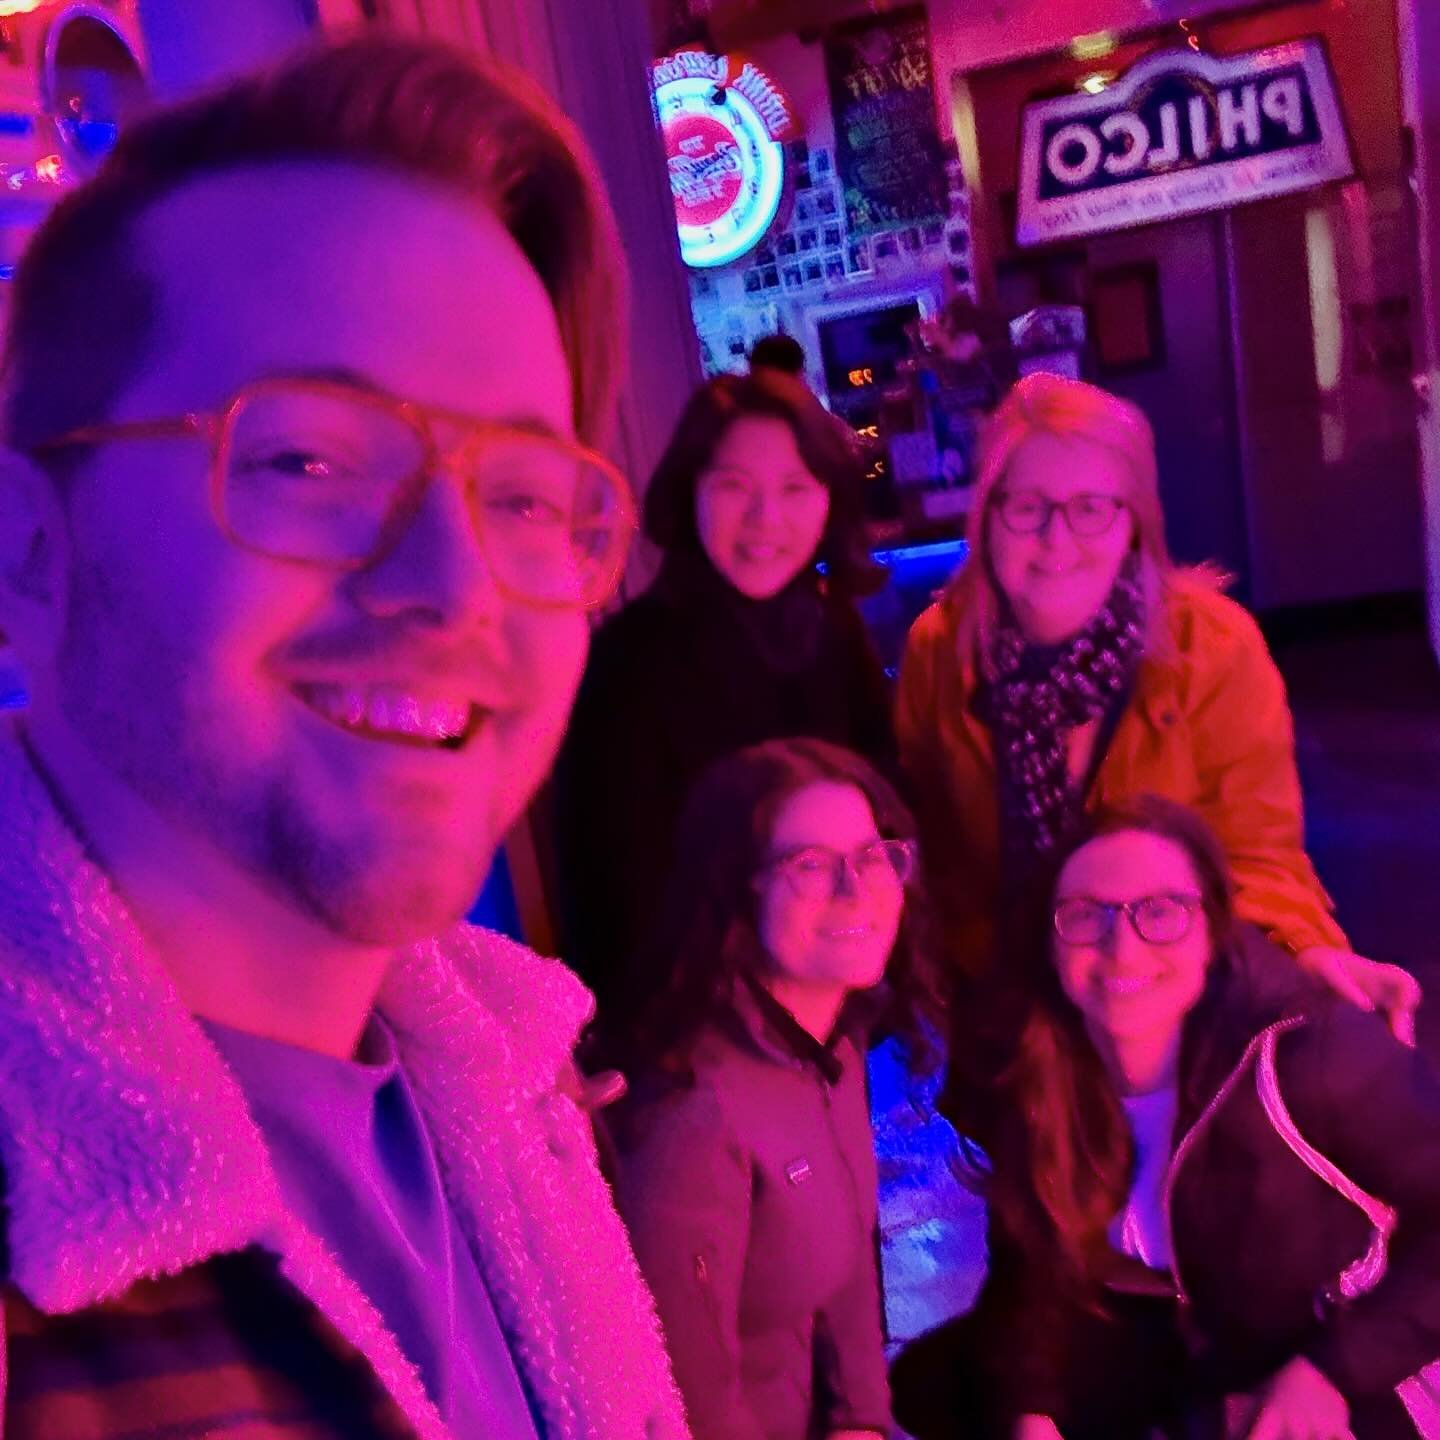 That&rsquo;s a wrap on this round of karaoke class. Thanks to this fabulous group of humans- I have to say it was a highlight of my week to sing with you all! Hit me up if you&rsquo;d like to get on the waitlist for the next round.